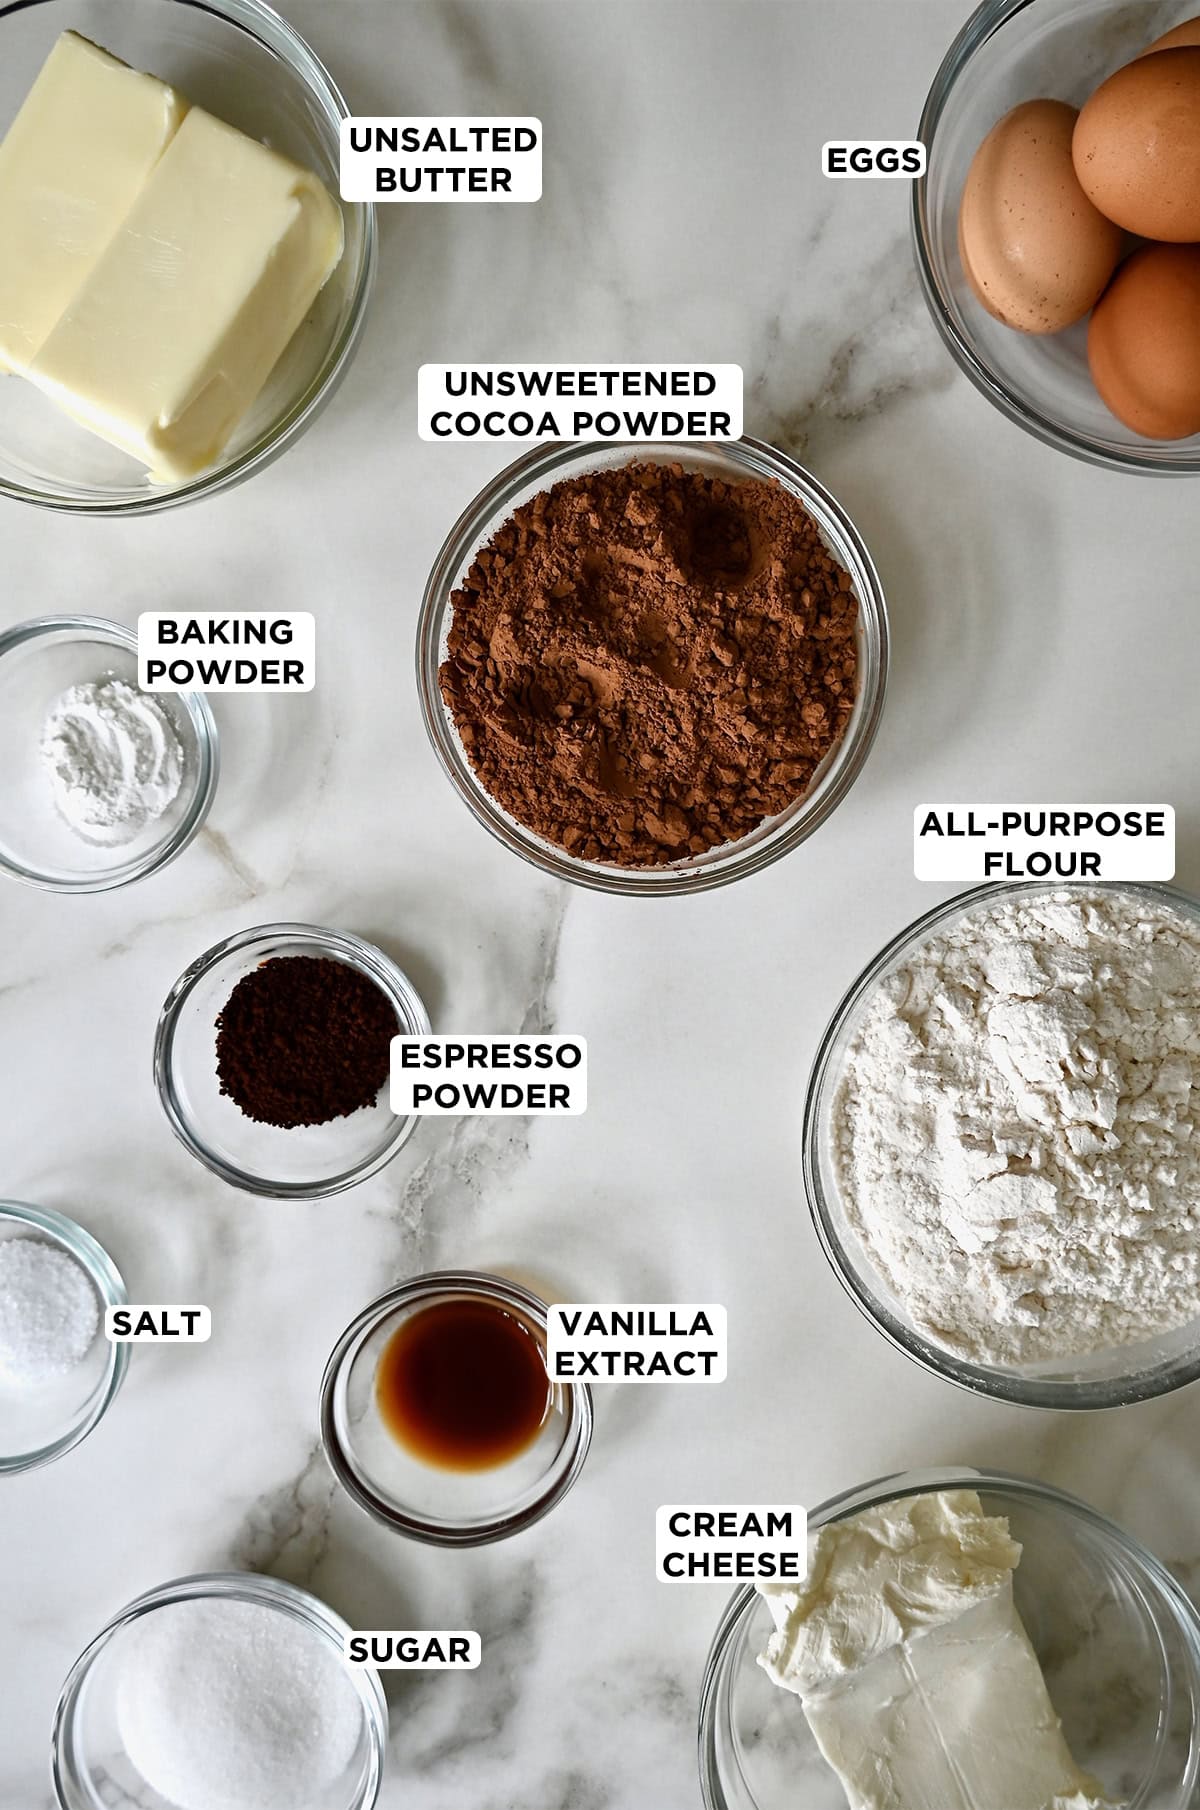 Clear glass bowls are filled with the ingredients for cheesecake brownie bikes, including sugar, cream cheese, vanilla, flour, salt, espresso powder, baking powder, butter, eggs and cocoa powder.